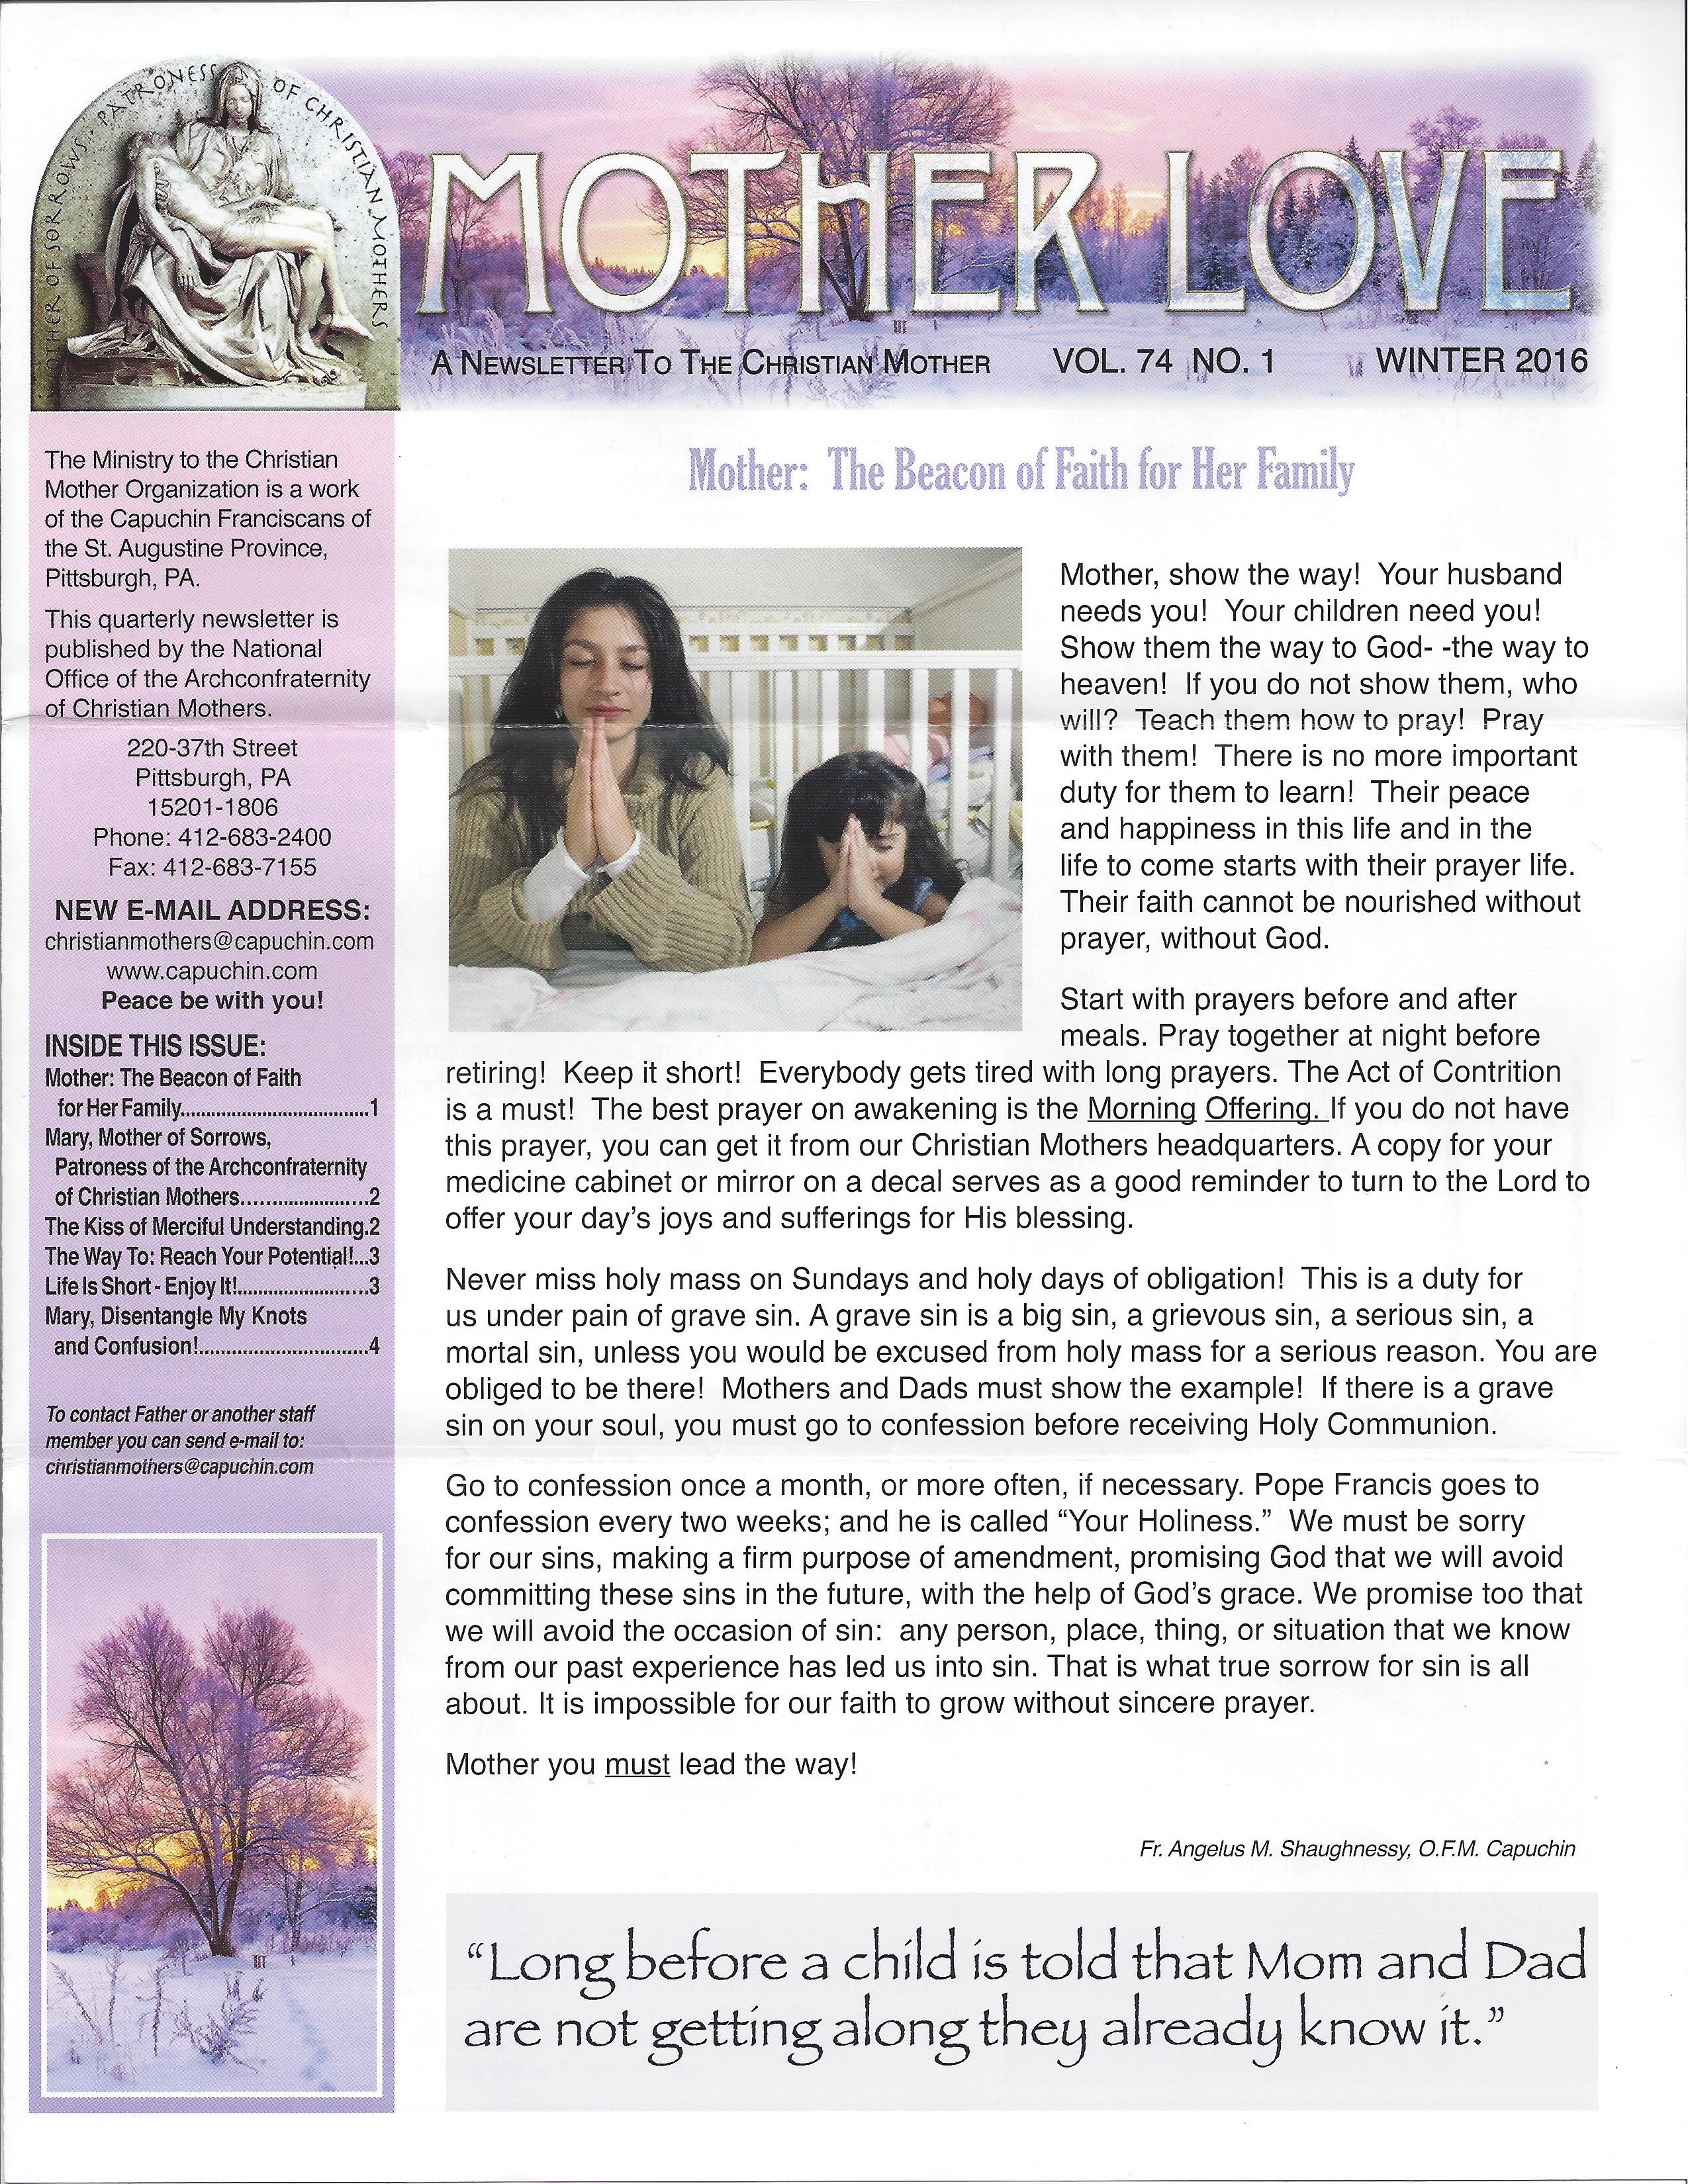 christian-mother-newsletter-page-1-winter-2016